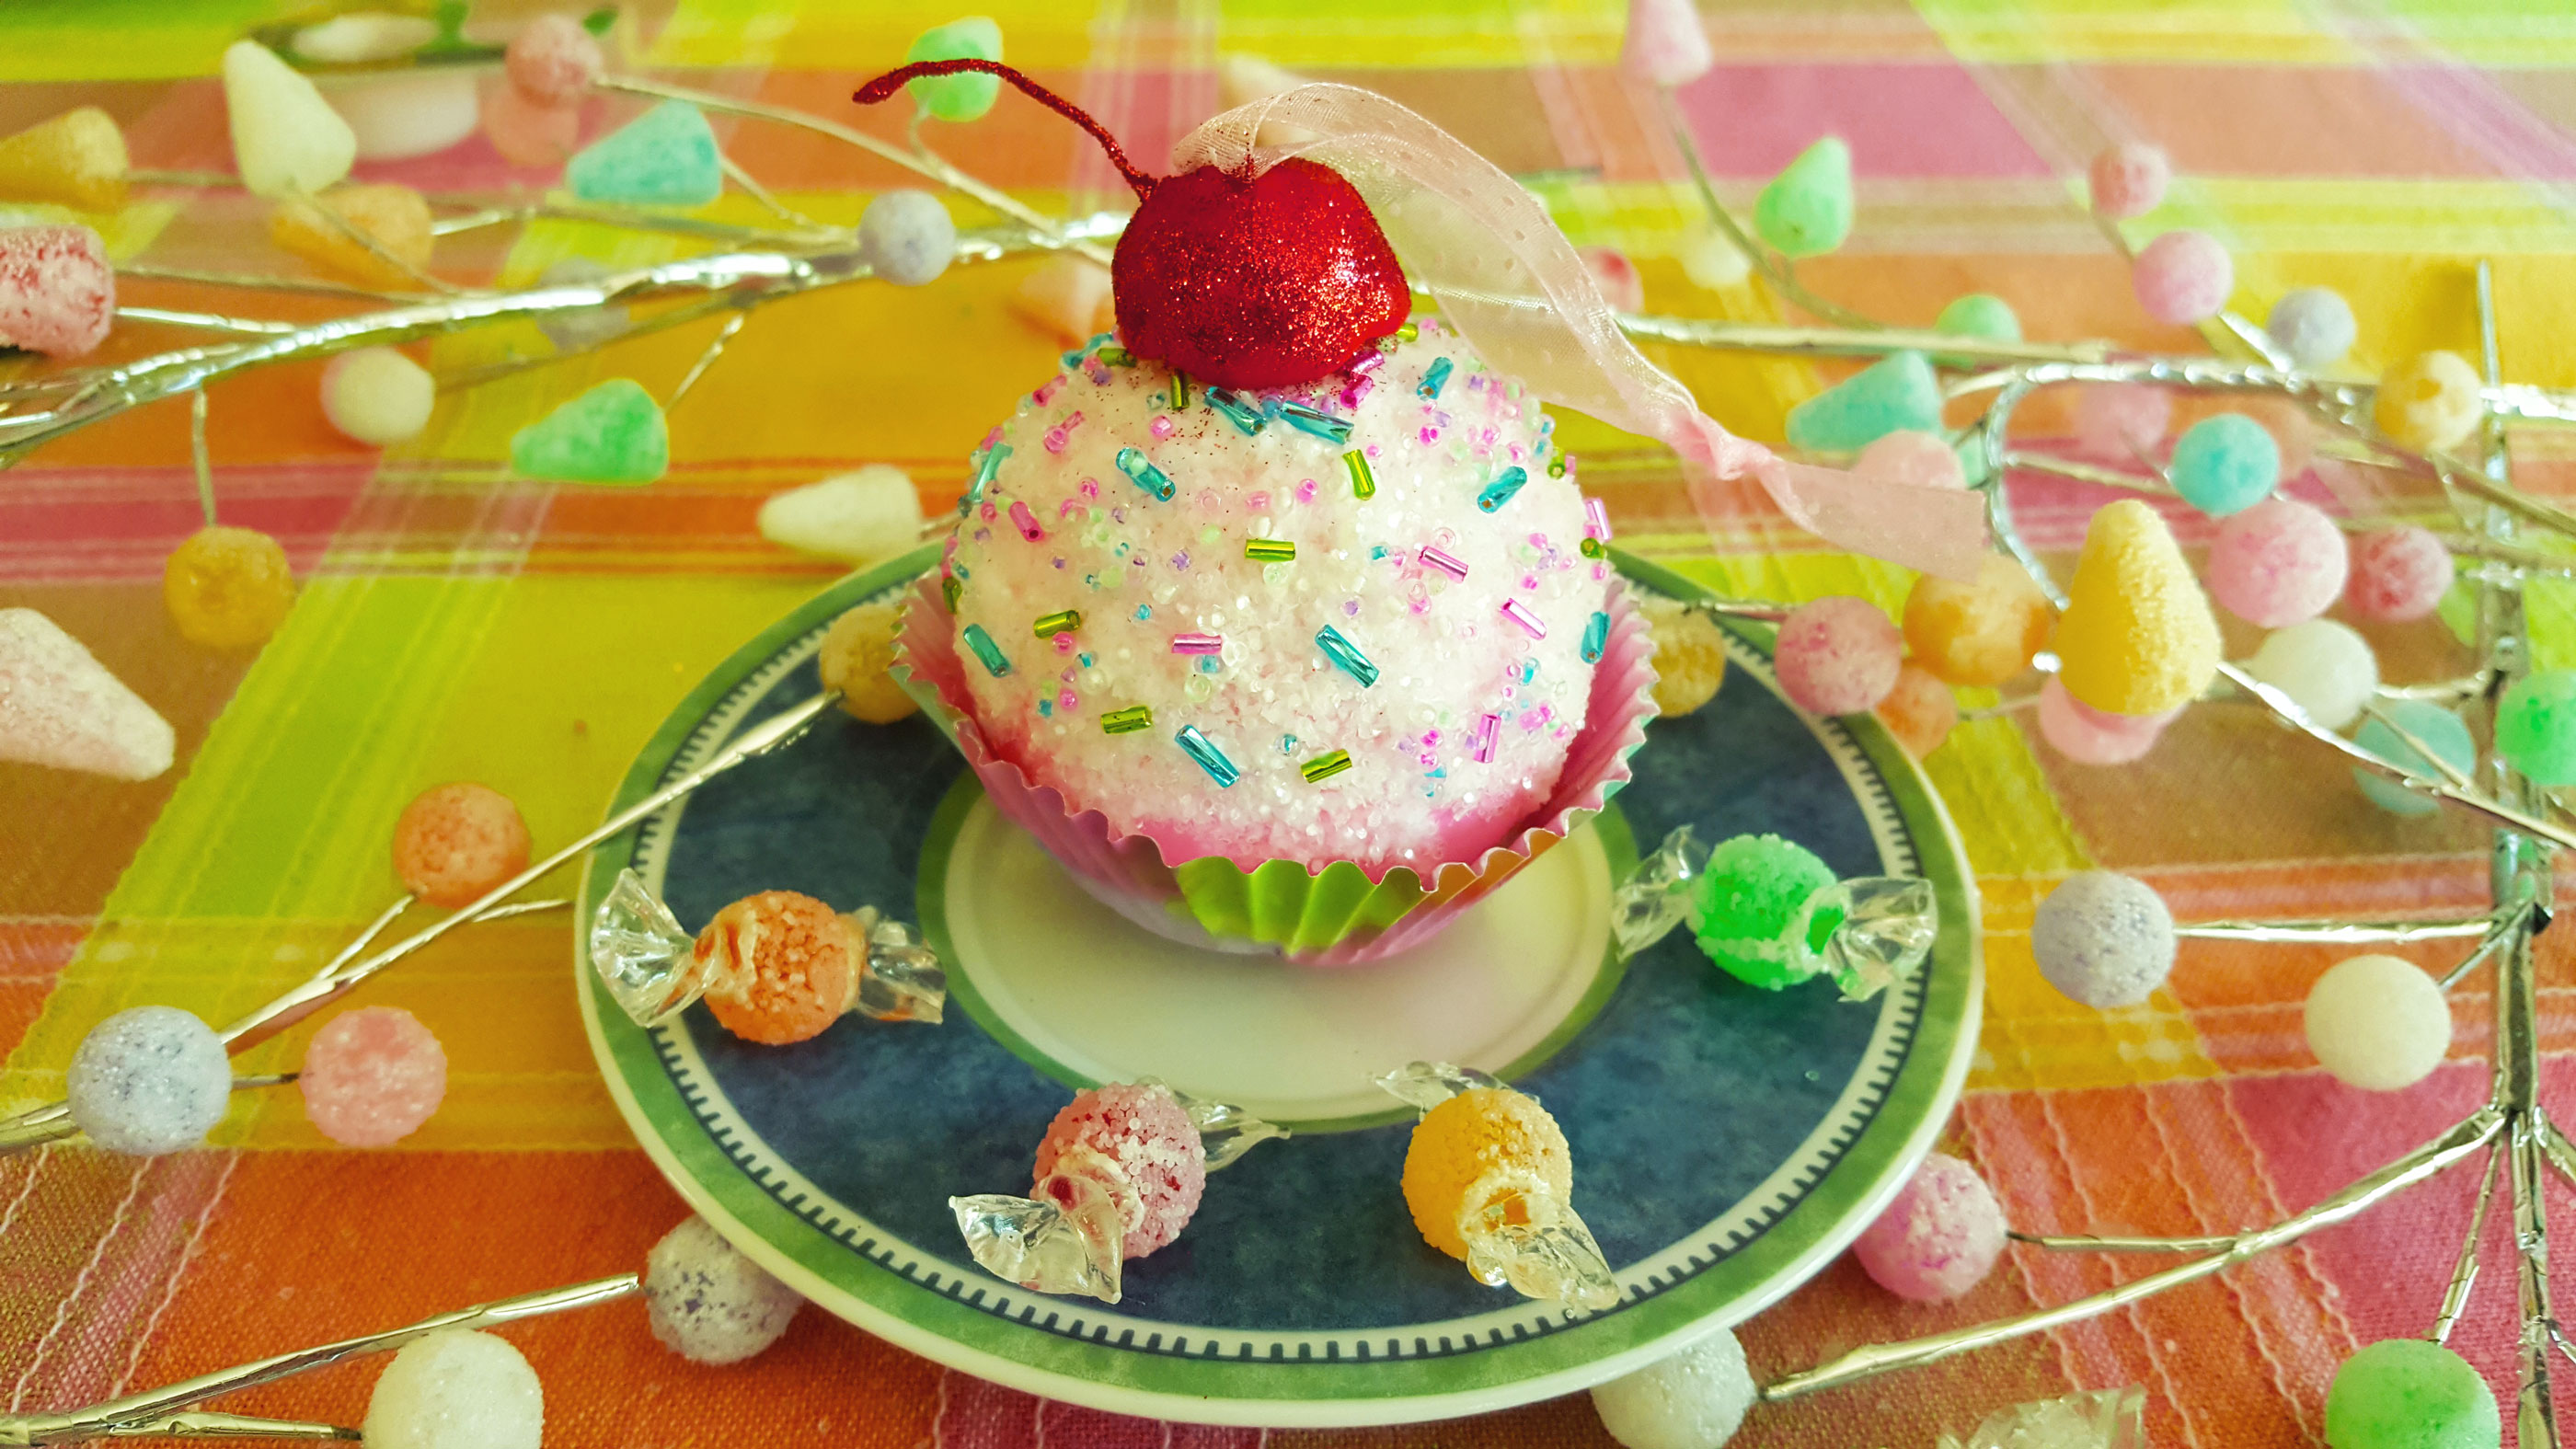 A finished pink cupcake DIY ornament with sprinkles and a cherry on top. | OrnamentShop.com